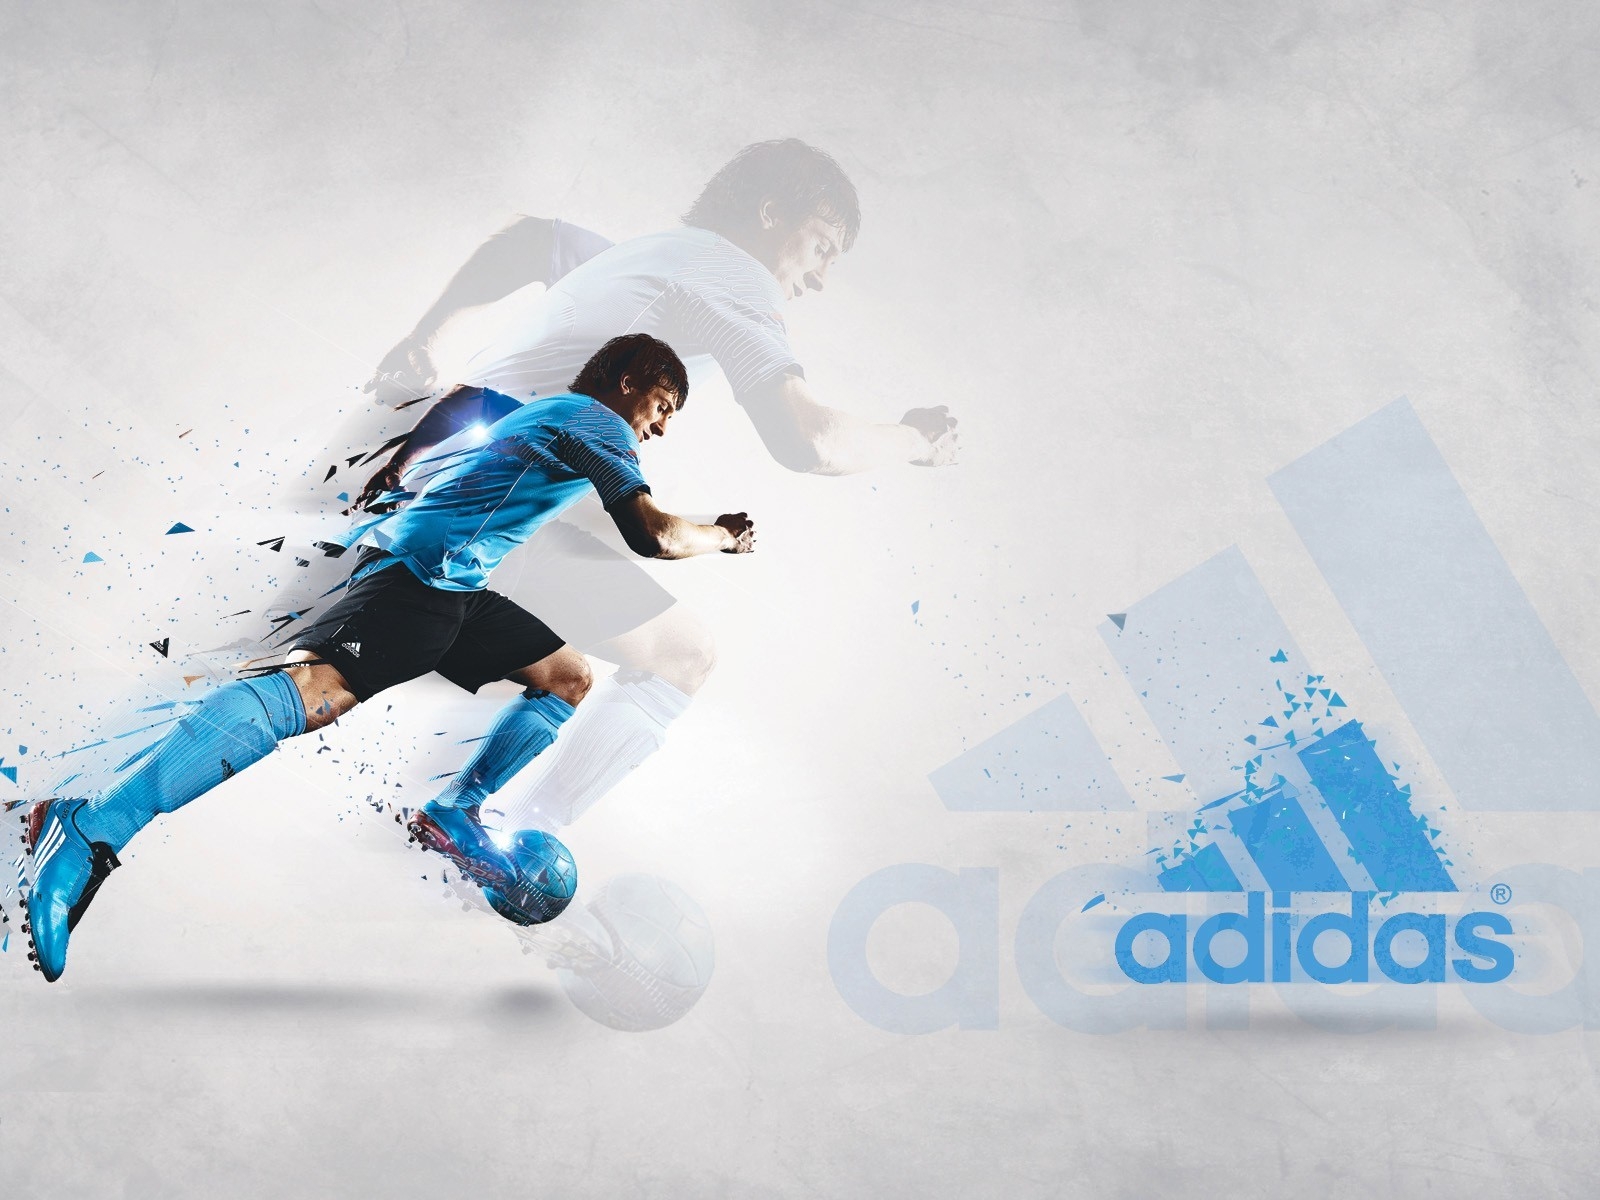 Adidas Poster for 1600 x 1200 resolution